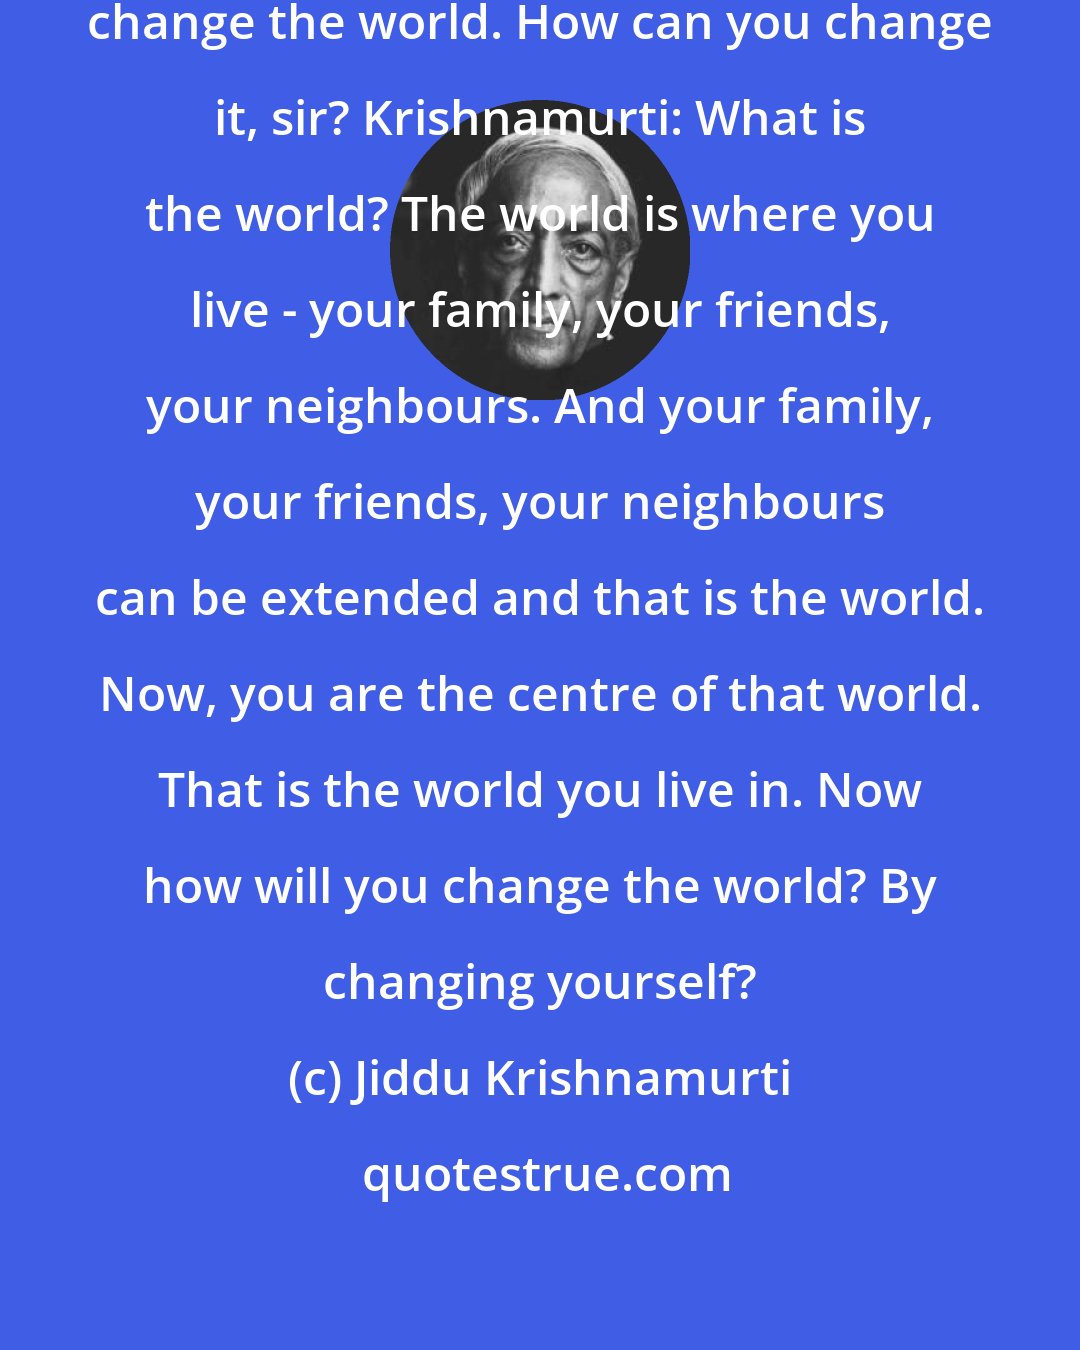 Jiddu Krishnamurti: Student: Sir, you said you must change the world. How can you change it, sir? Krishnamurti: What is the world? The world is where you live - your family, your friends, your neighbours. And your family, your friends, your neighbours can be extended and that is the world. Now, you are the centre of that world. That is the world you live in. Now how will you change the world? By changing yourself?